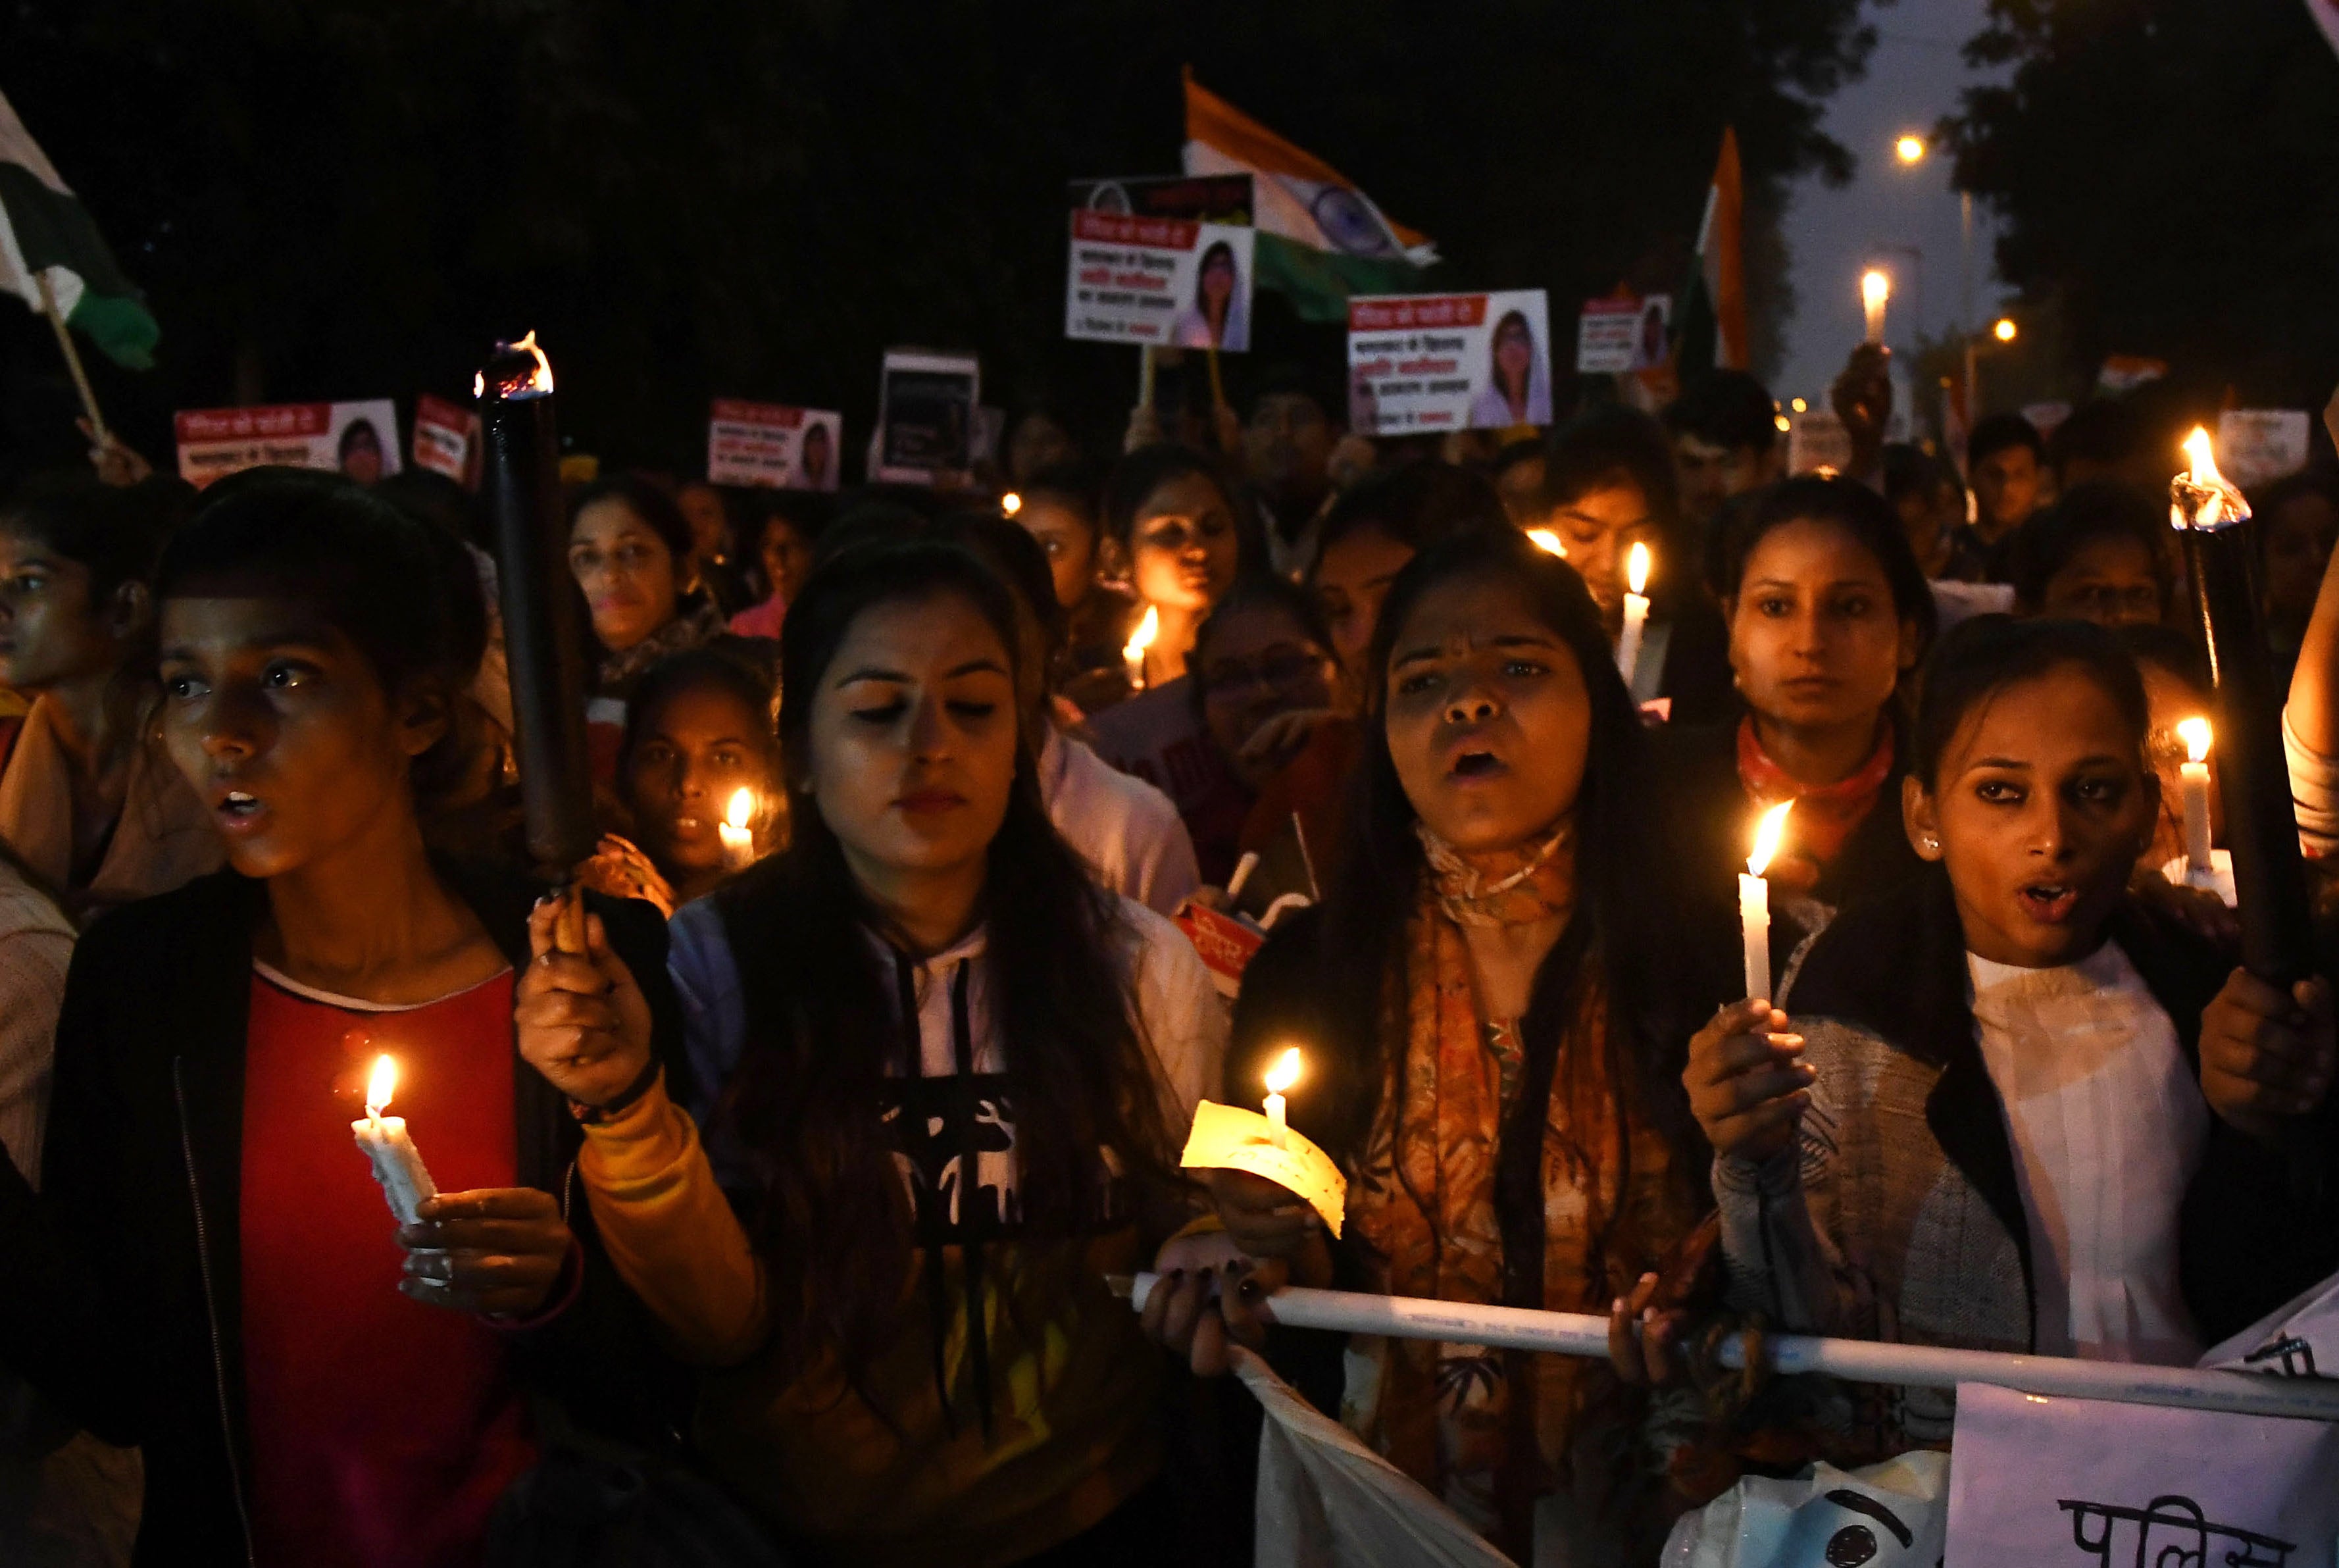 Indian women’s rights activists during a candle light march in Delhi in December 2019 to denounce violence against women